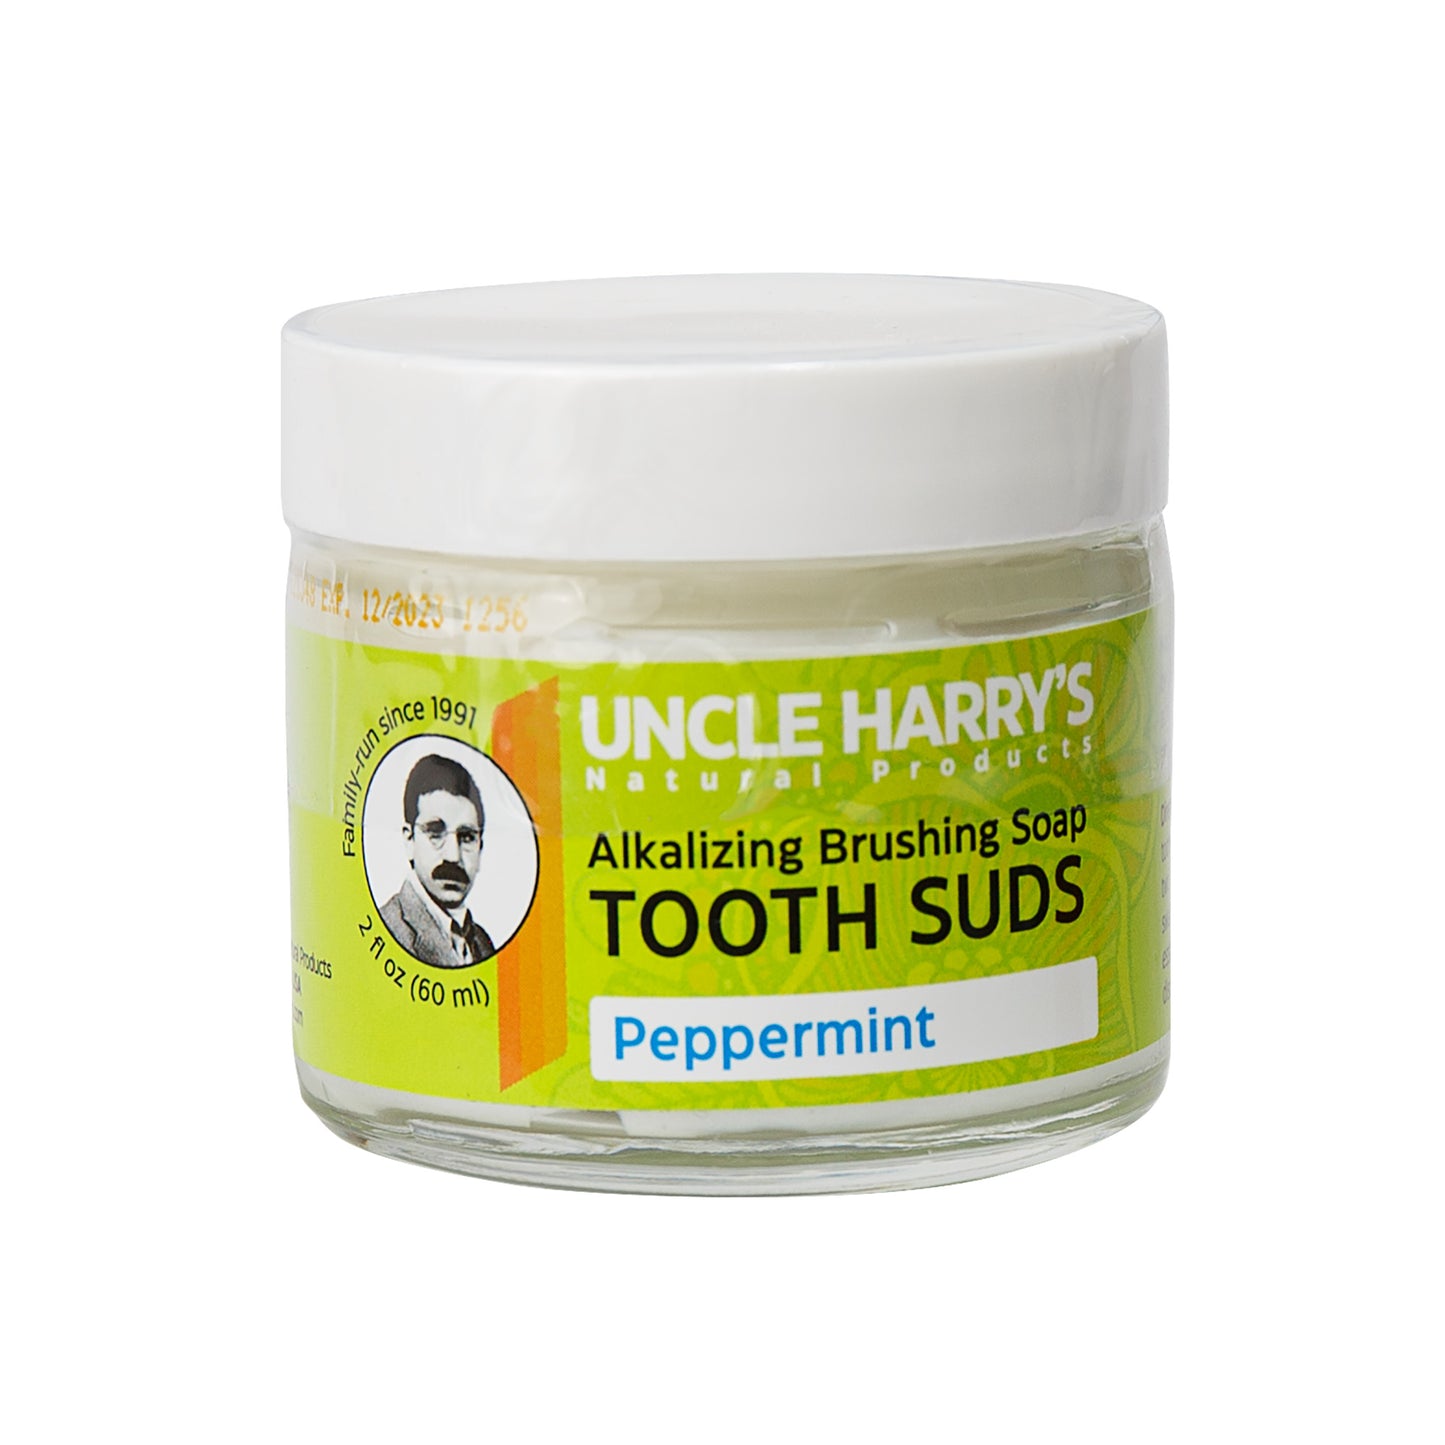 Uncle Harry's Natural Products Peppermint Brushing Soap Tooth Suds (2 oz)